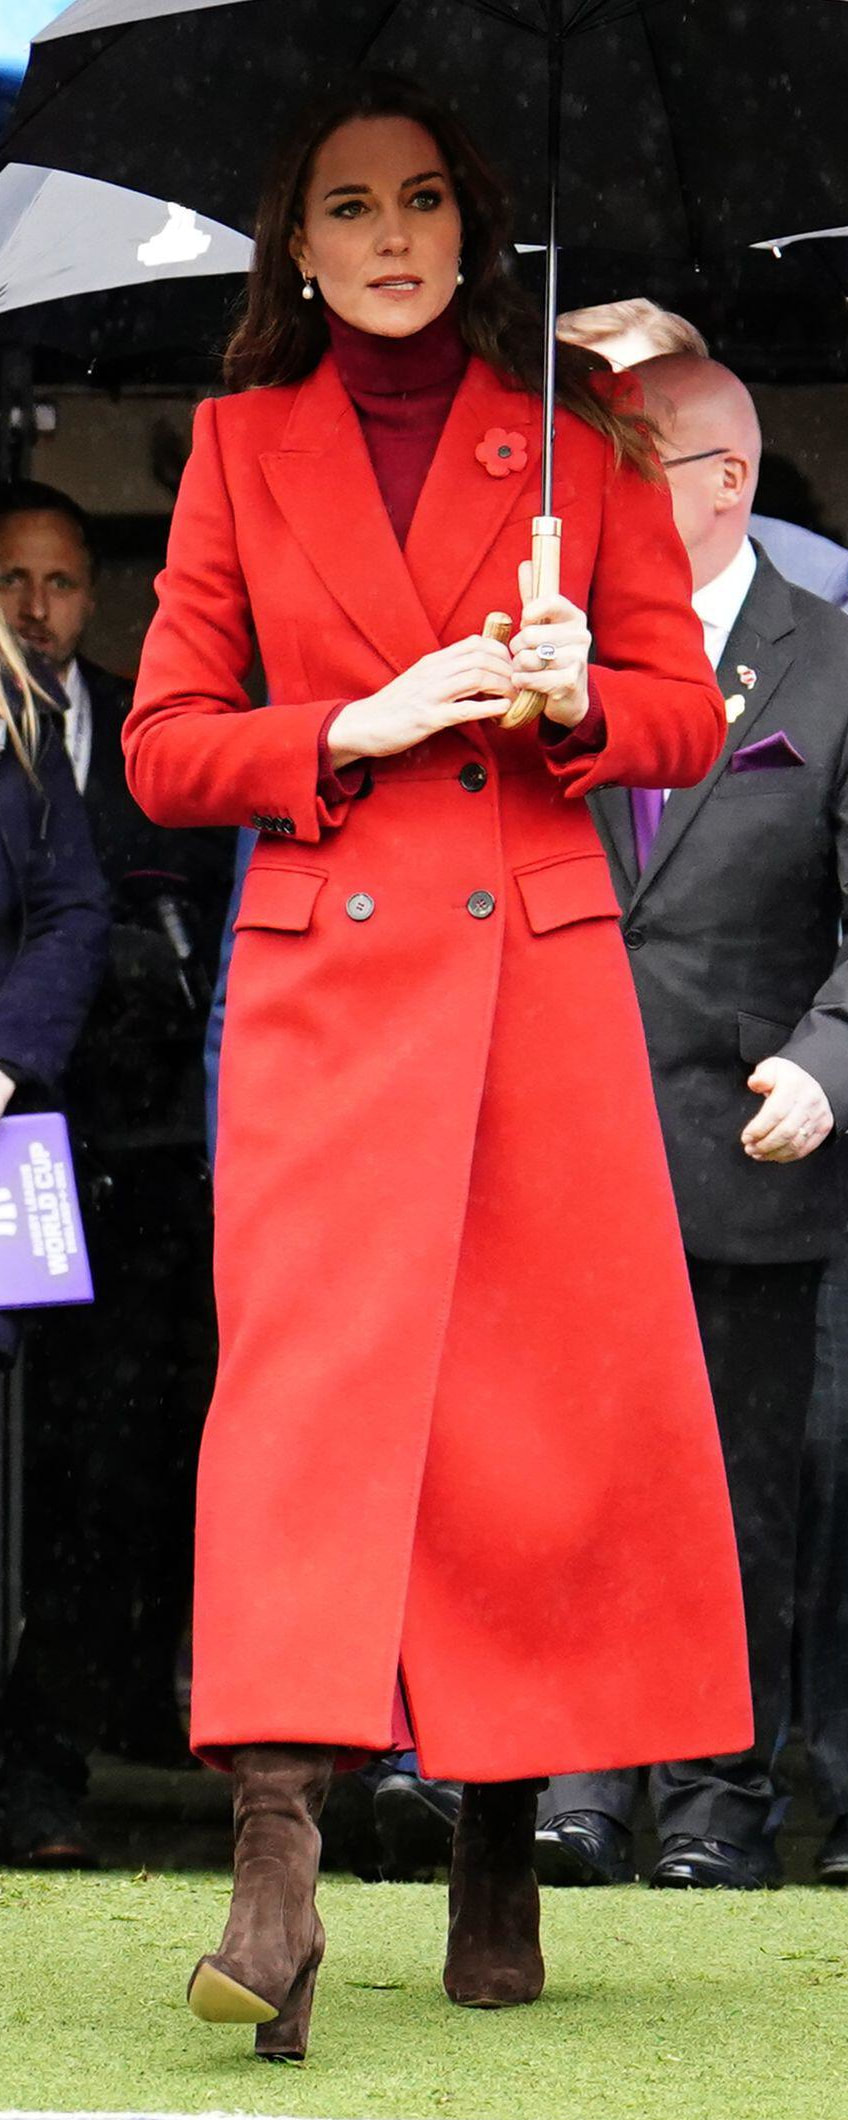 Kiltane Cashmere Polo Neck Jumper in Bordeaux as seen on Kate Middleton, Princess of Wales.